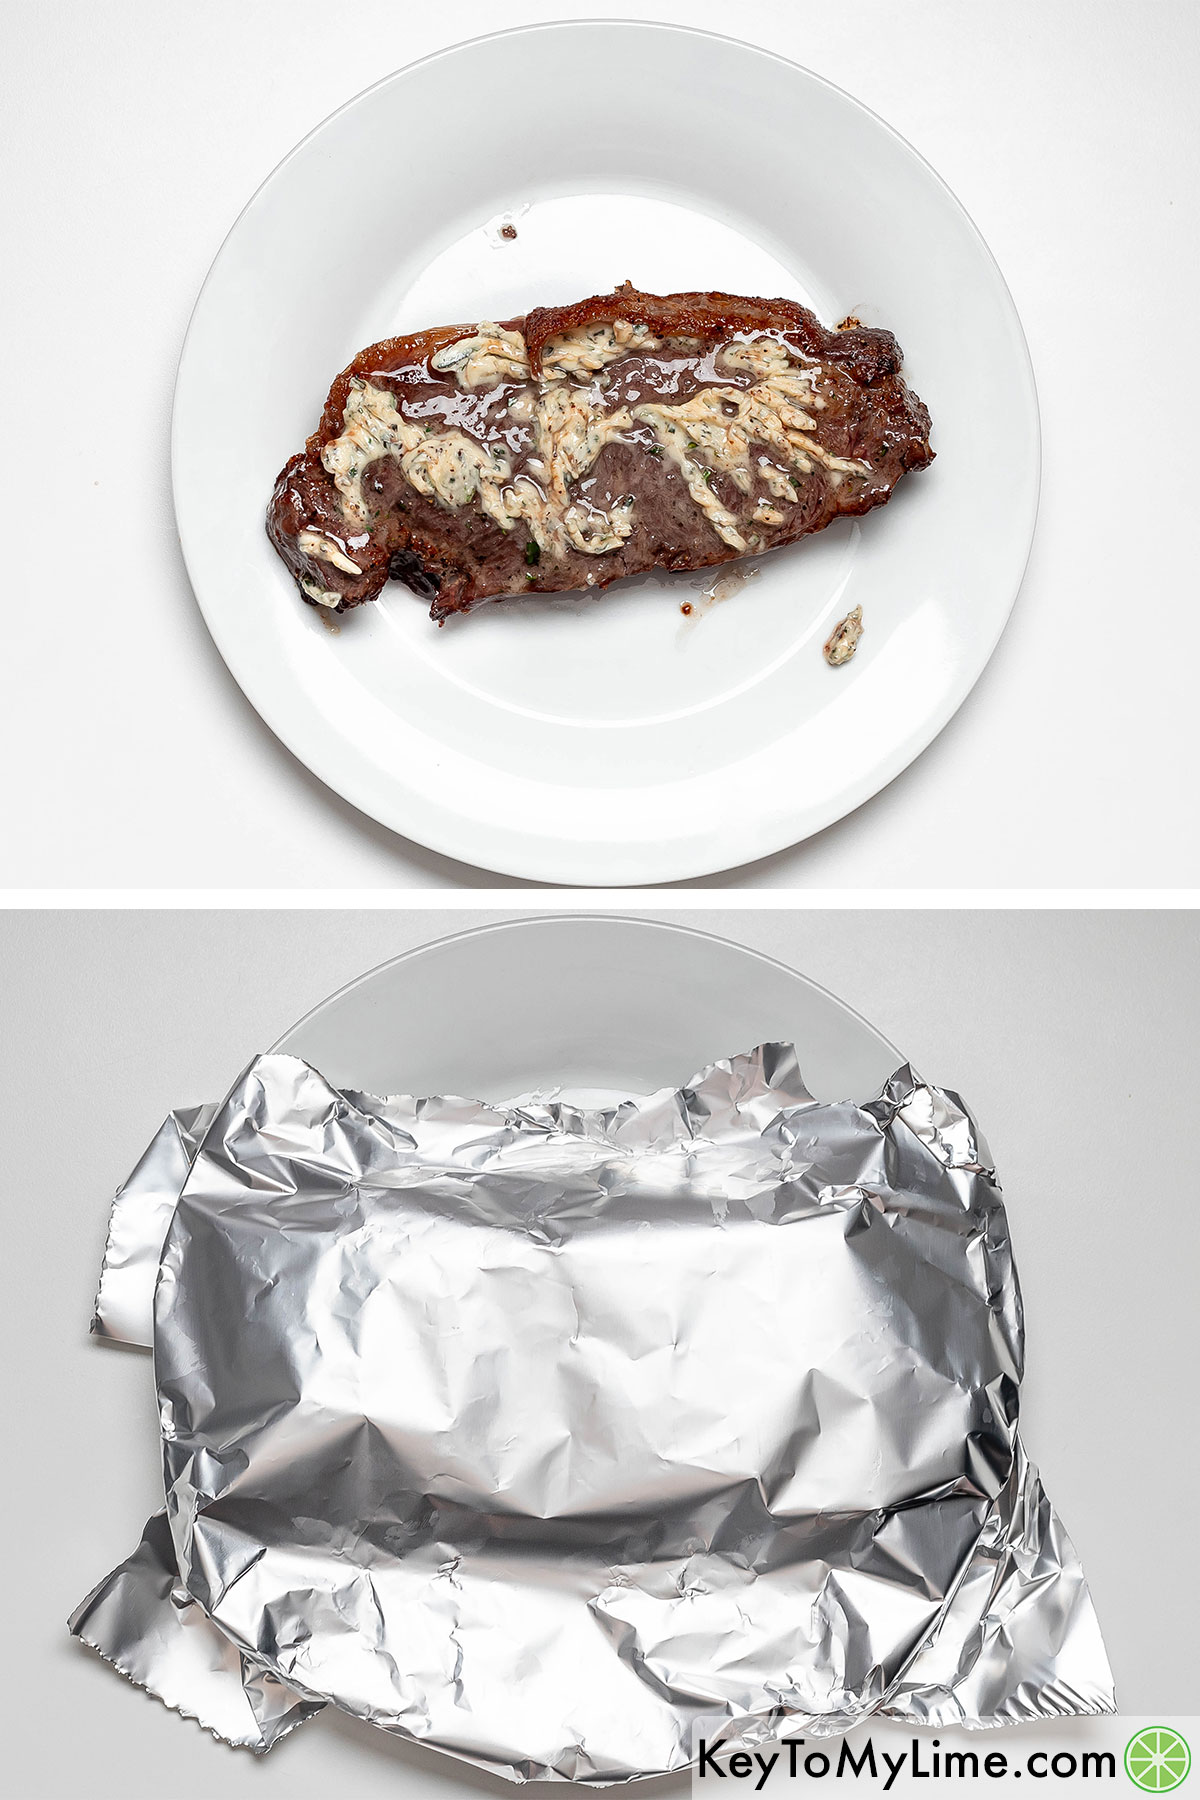 Adding the butter mixture to both sides of the cooked steak and resting under tented aluminum.